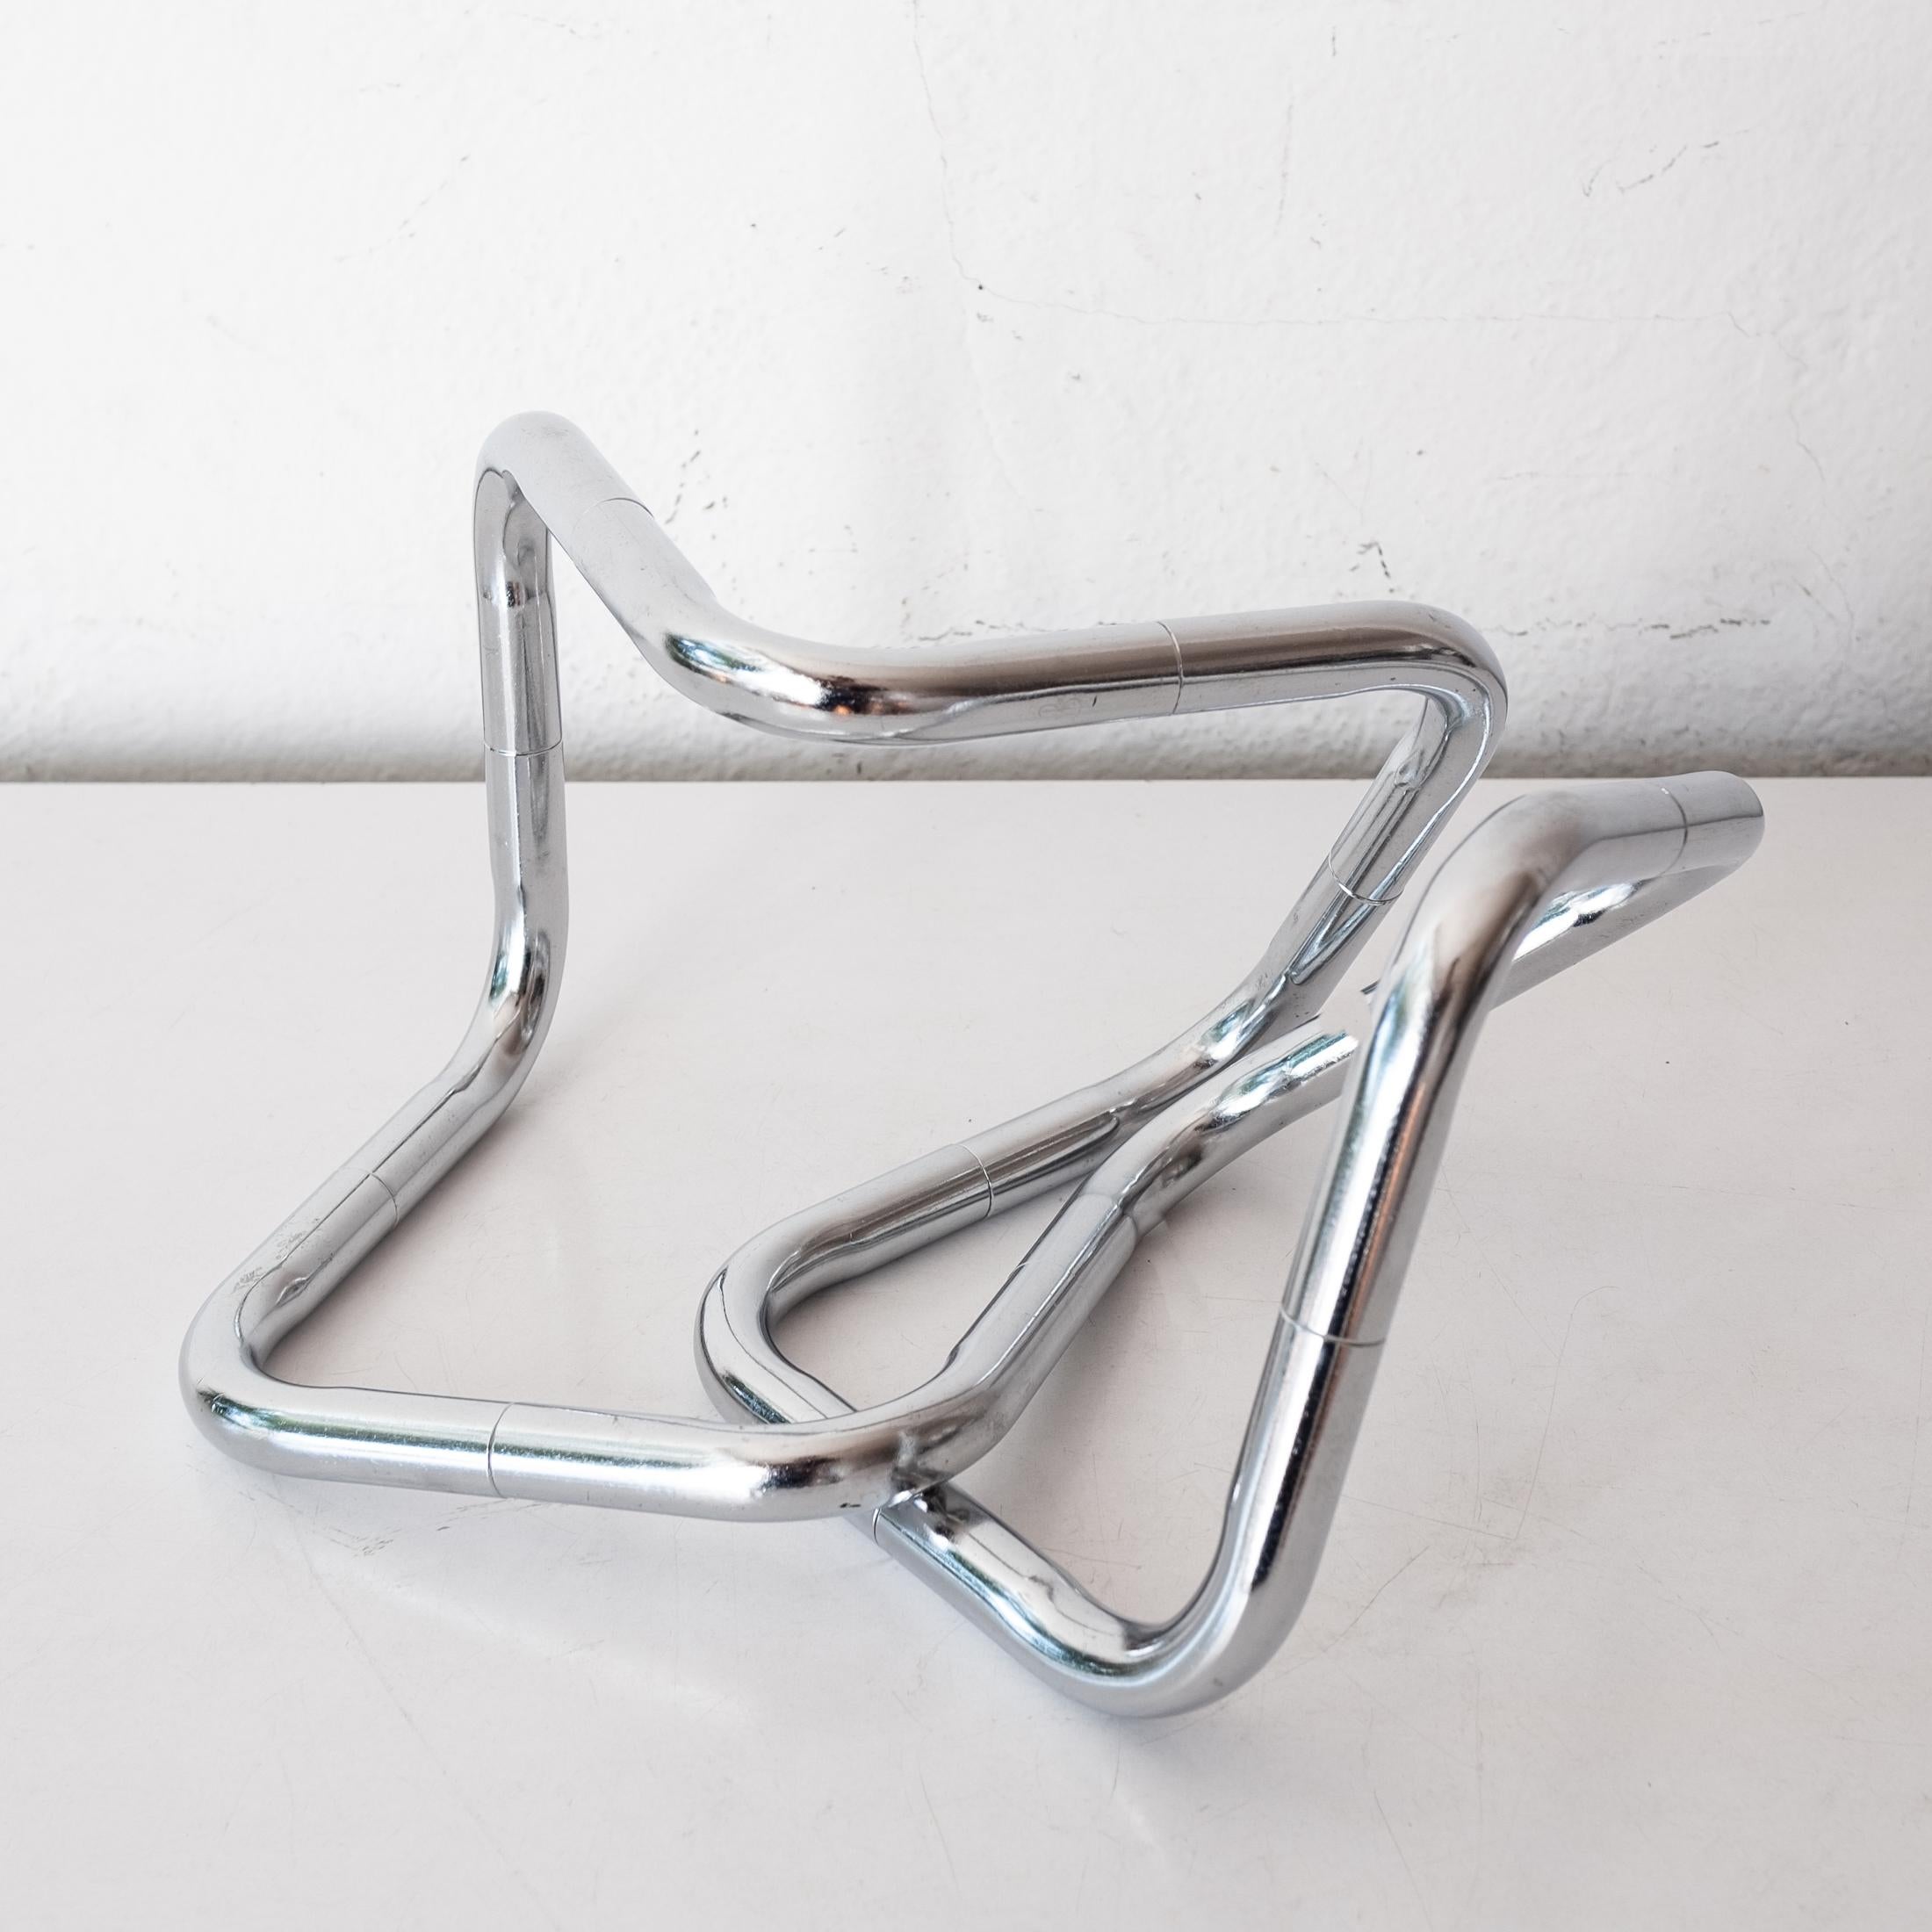 Modernist abstract kinetic tangle sculpture. Fully articulating abstract stainless steel sculpture. 1980s.